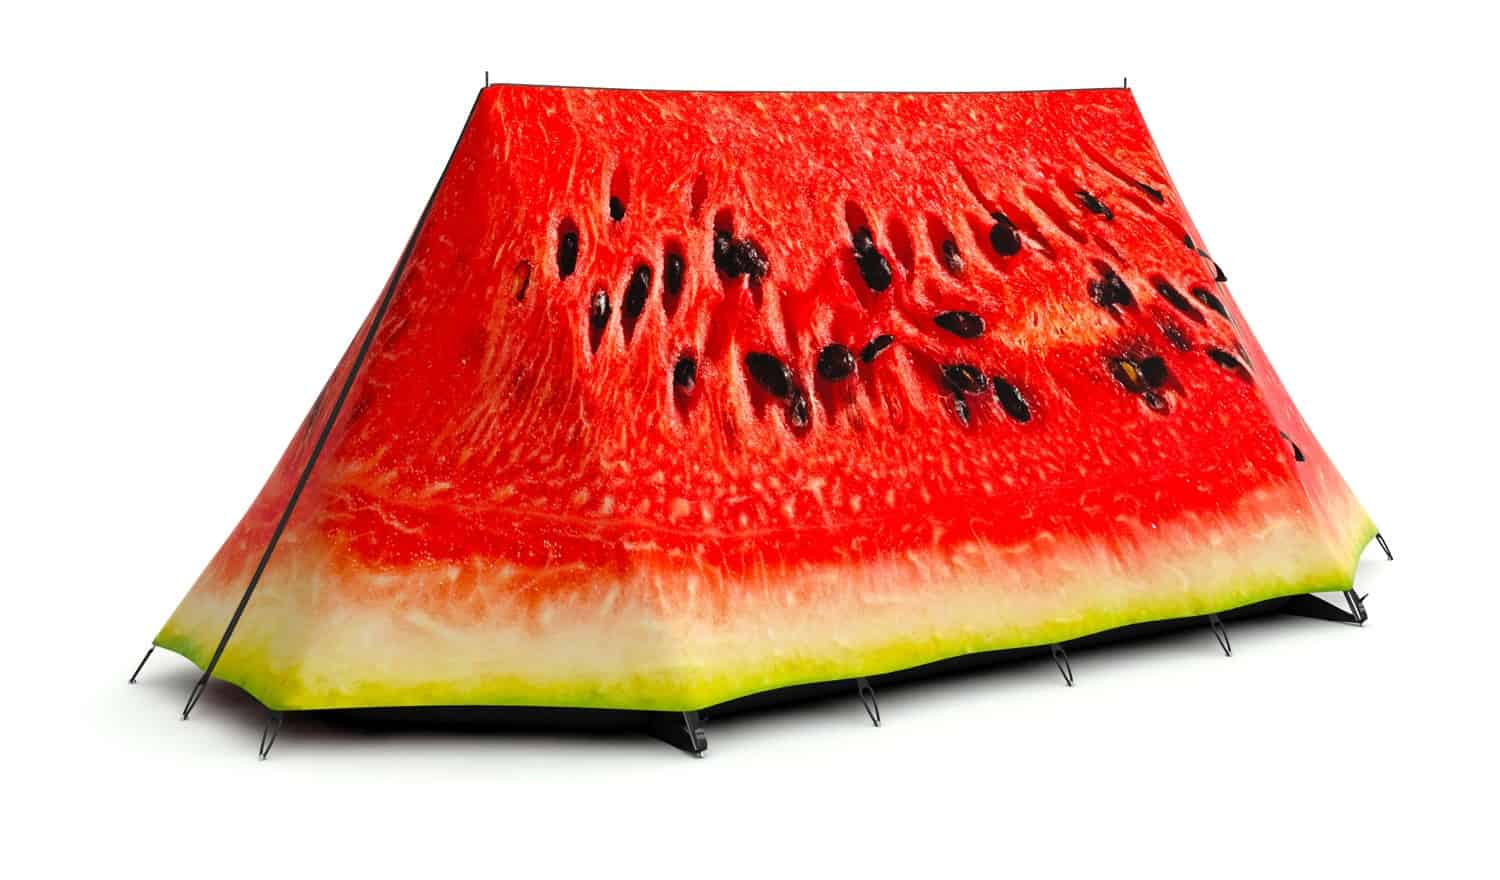 What a Melon 2-Person Tent Novelty Item Watermelon